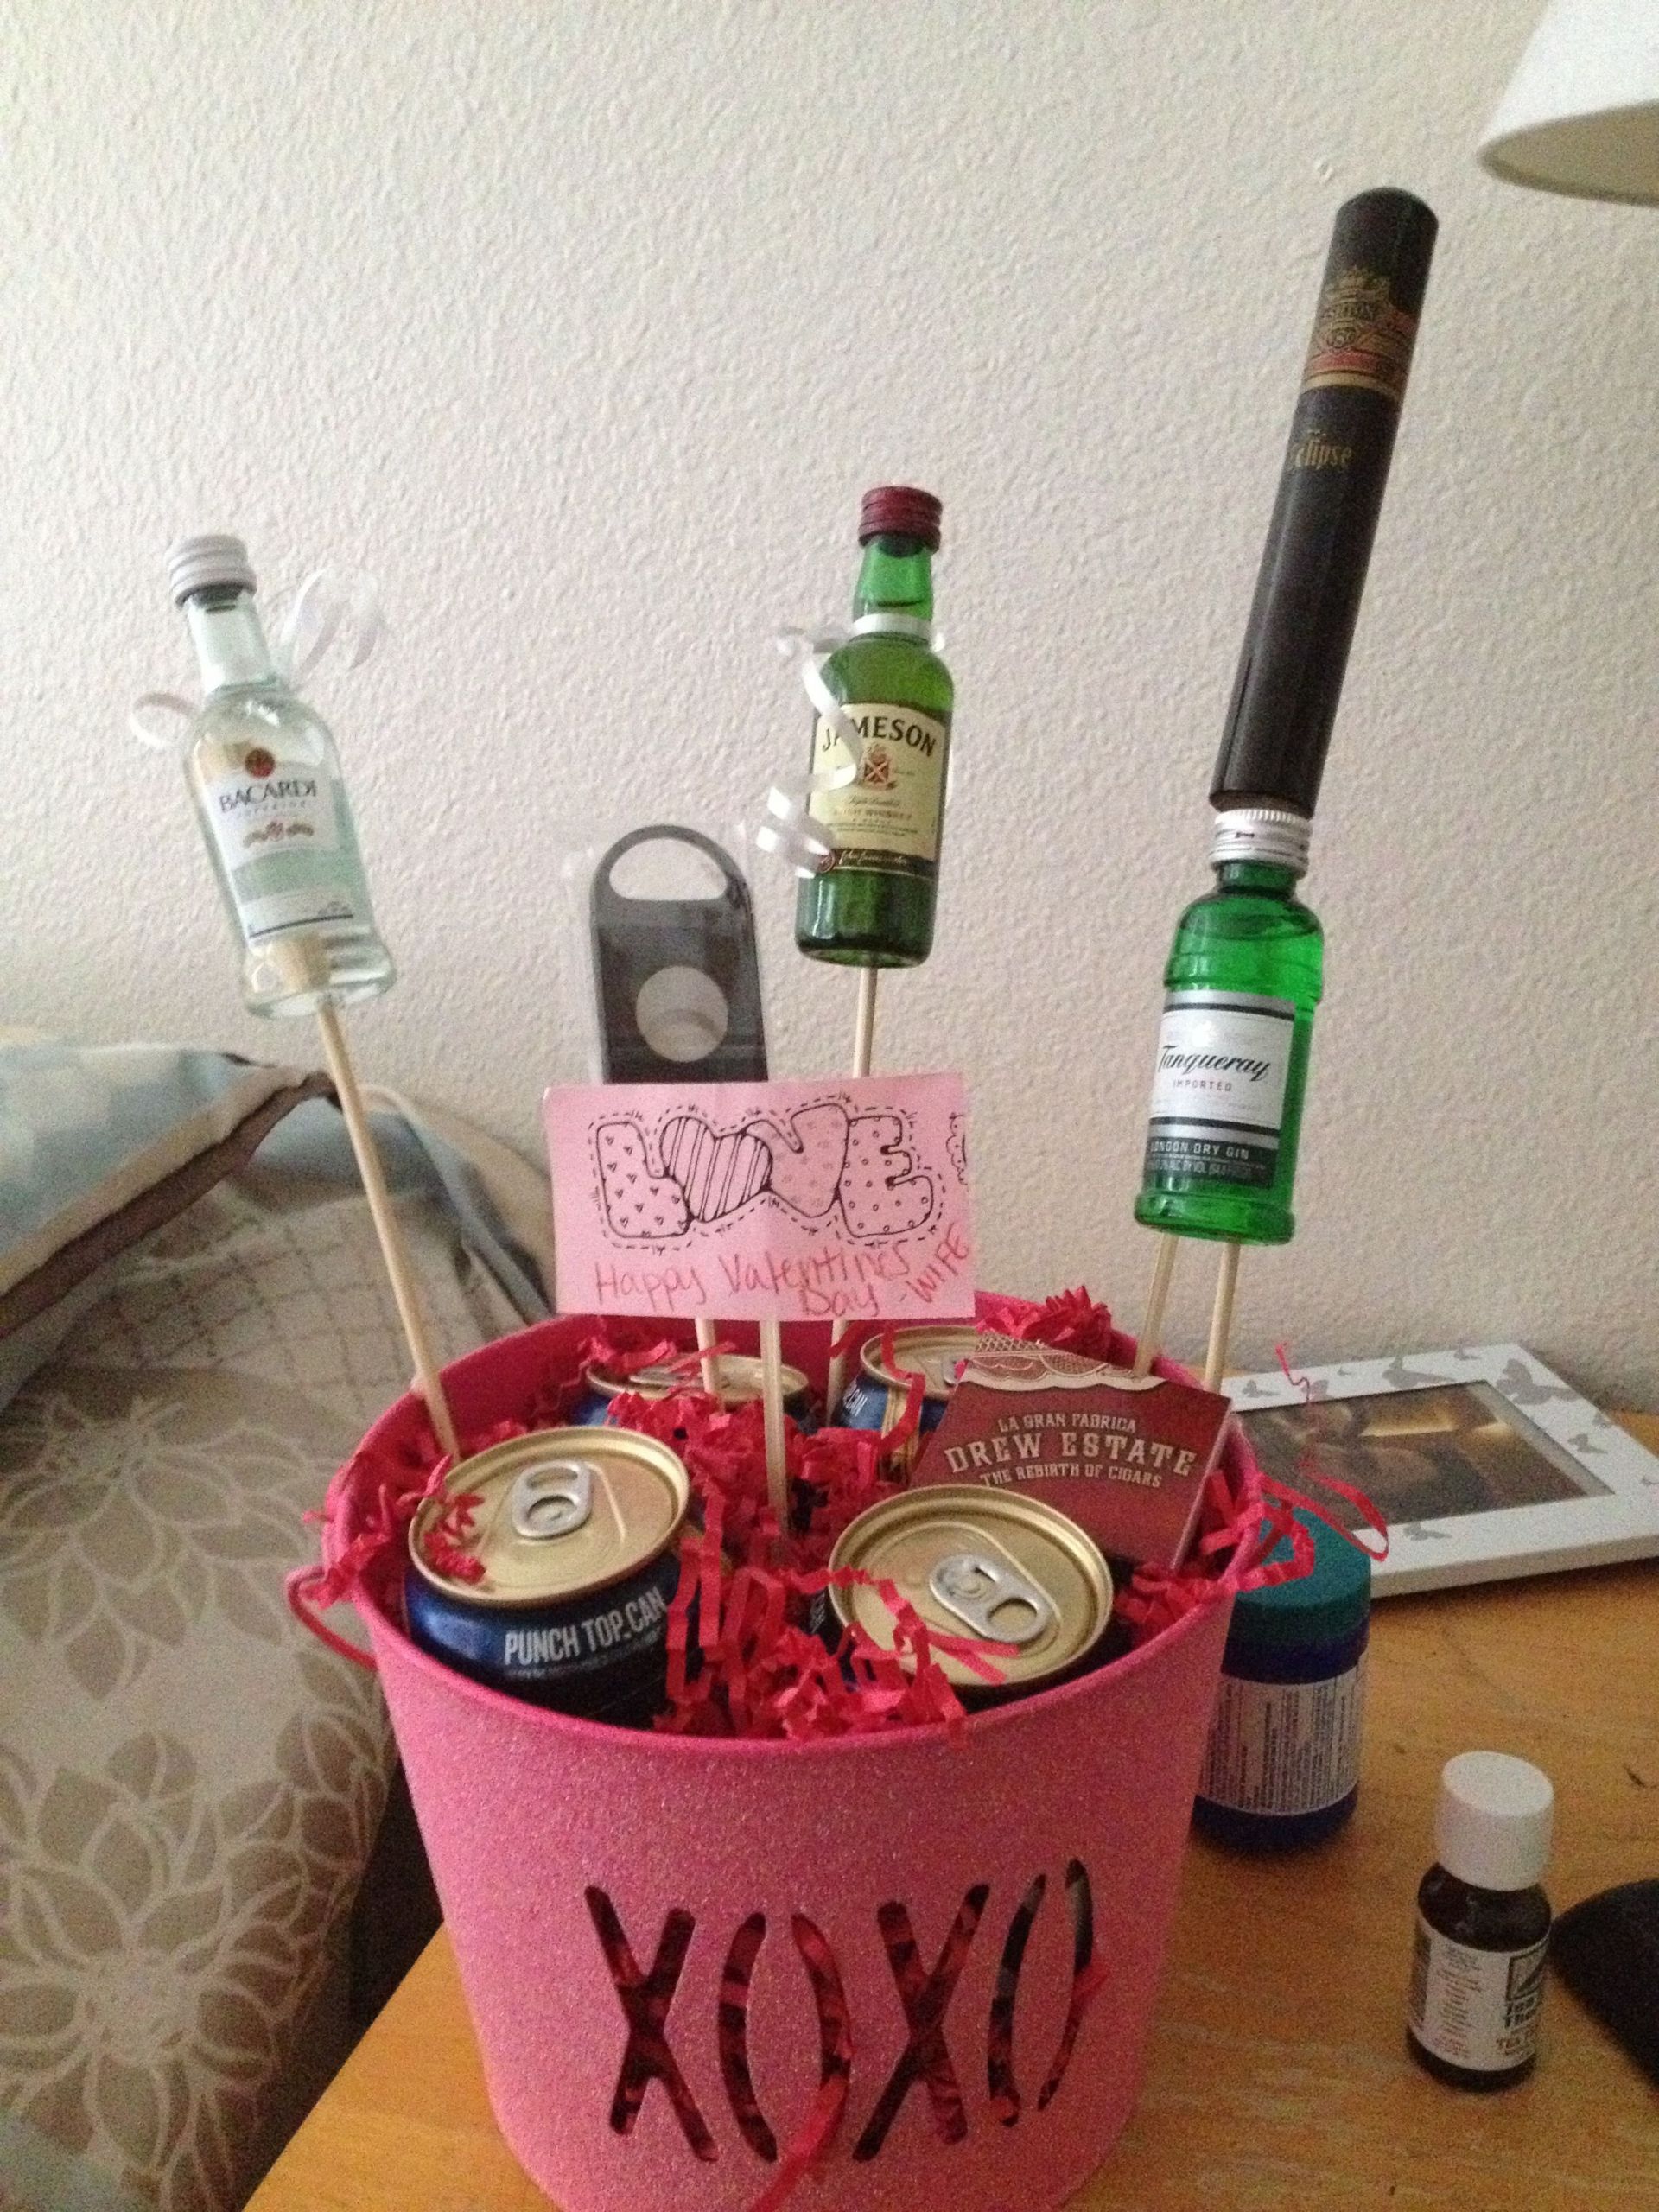 Valentines Gift Ideas For Husband
 I would do this in Christmas a theme t for husband